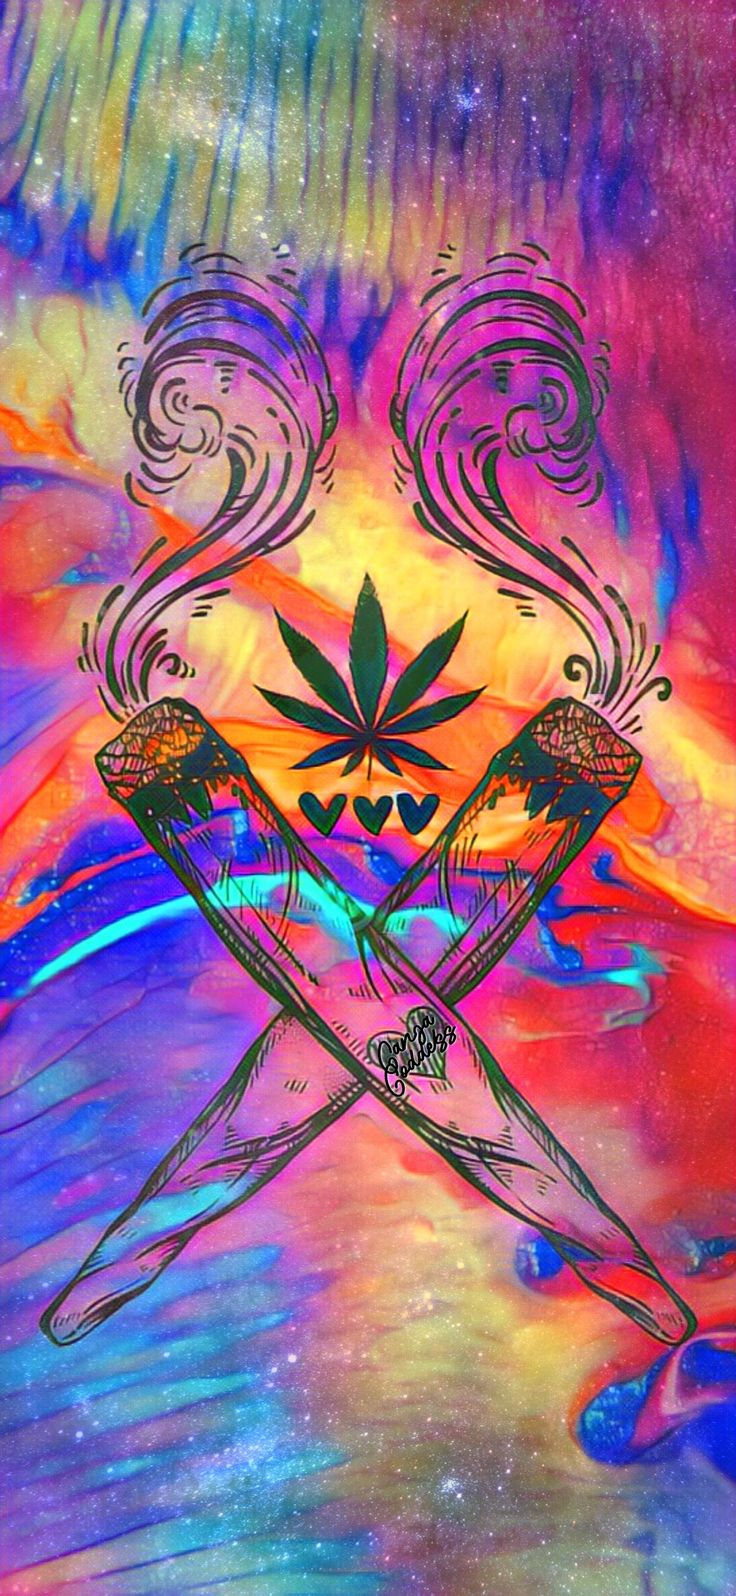 Pin on weed hippie painting weed wallpaper trippy iphone wallpaper